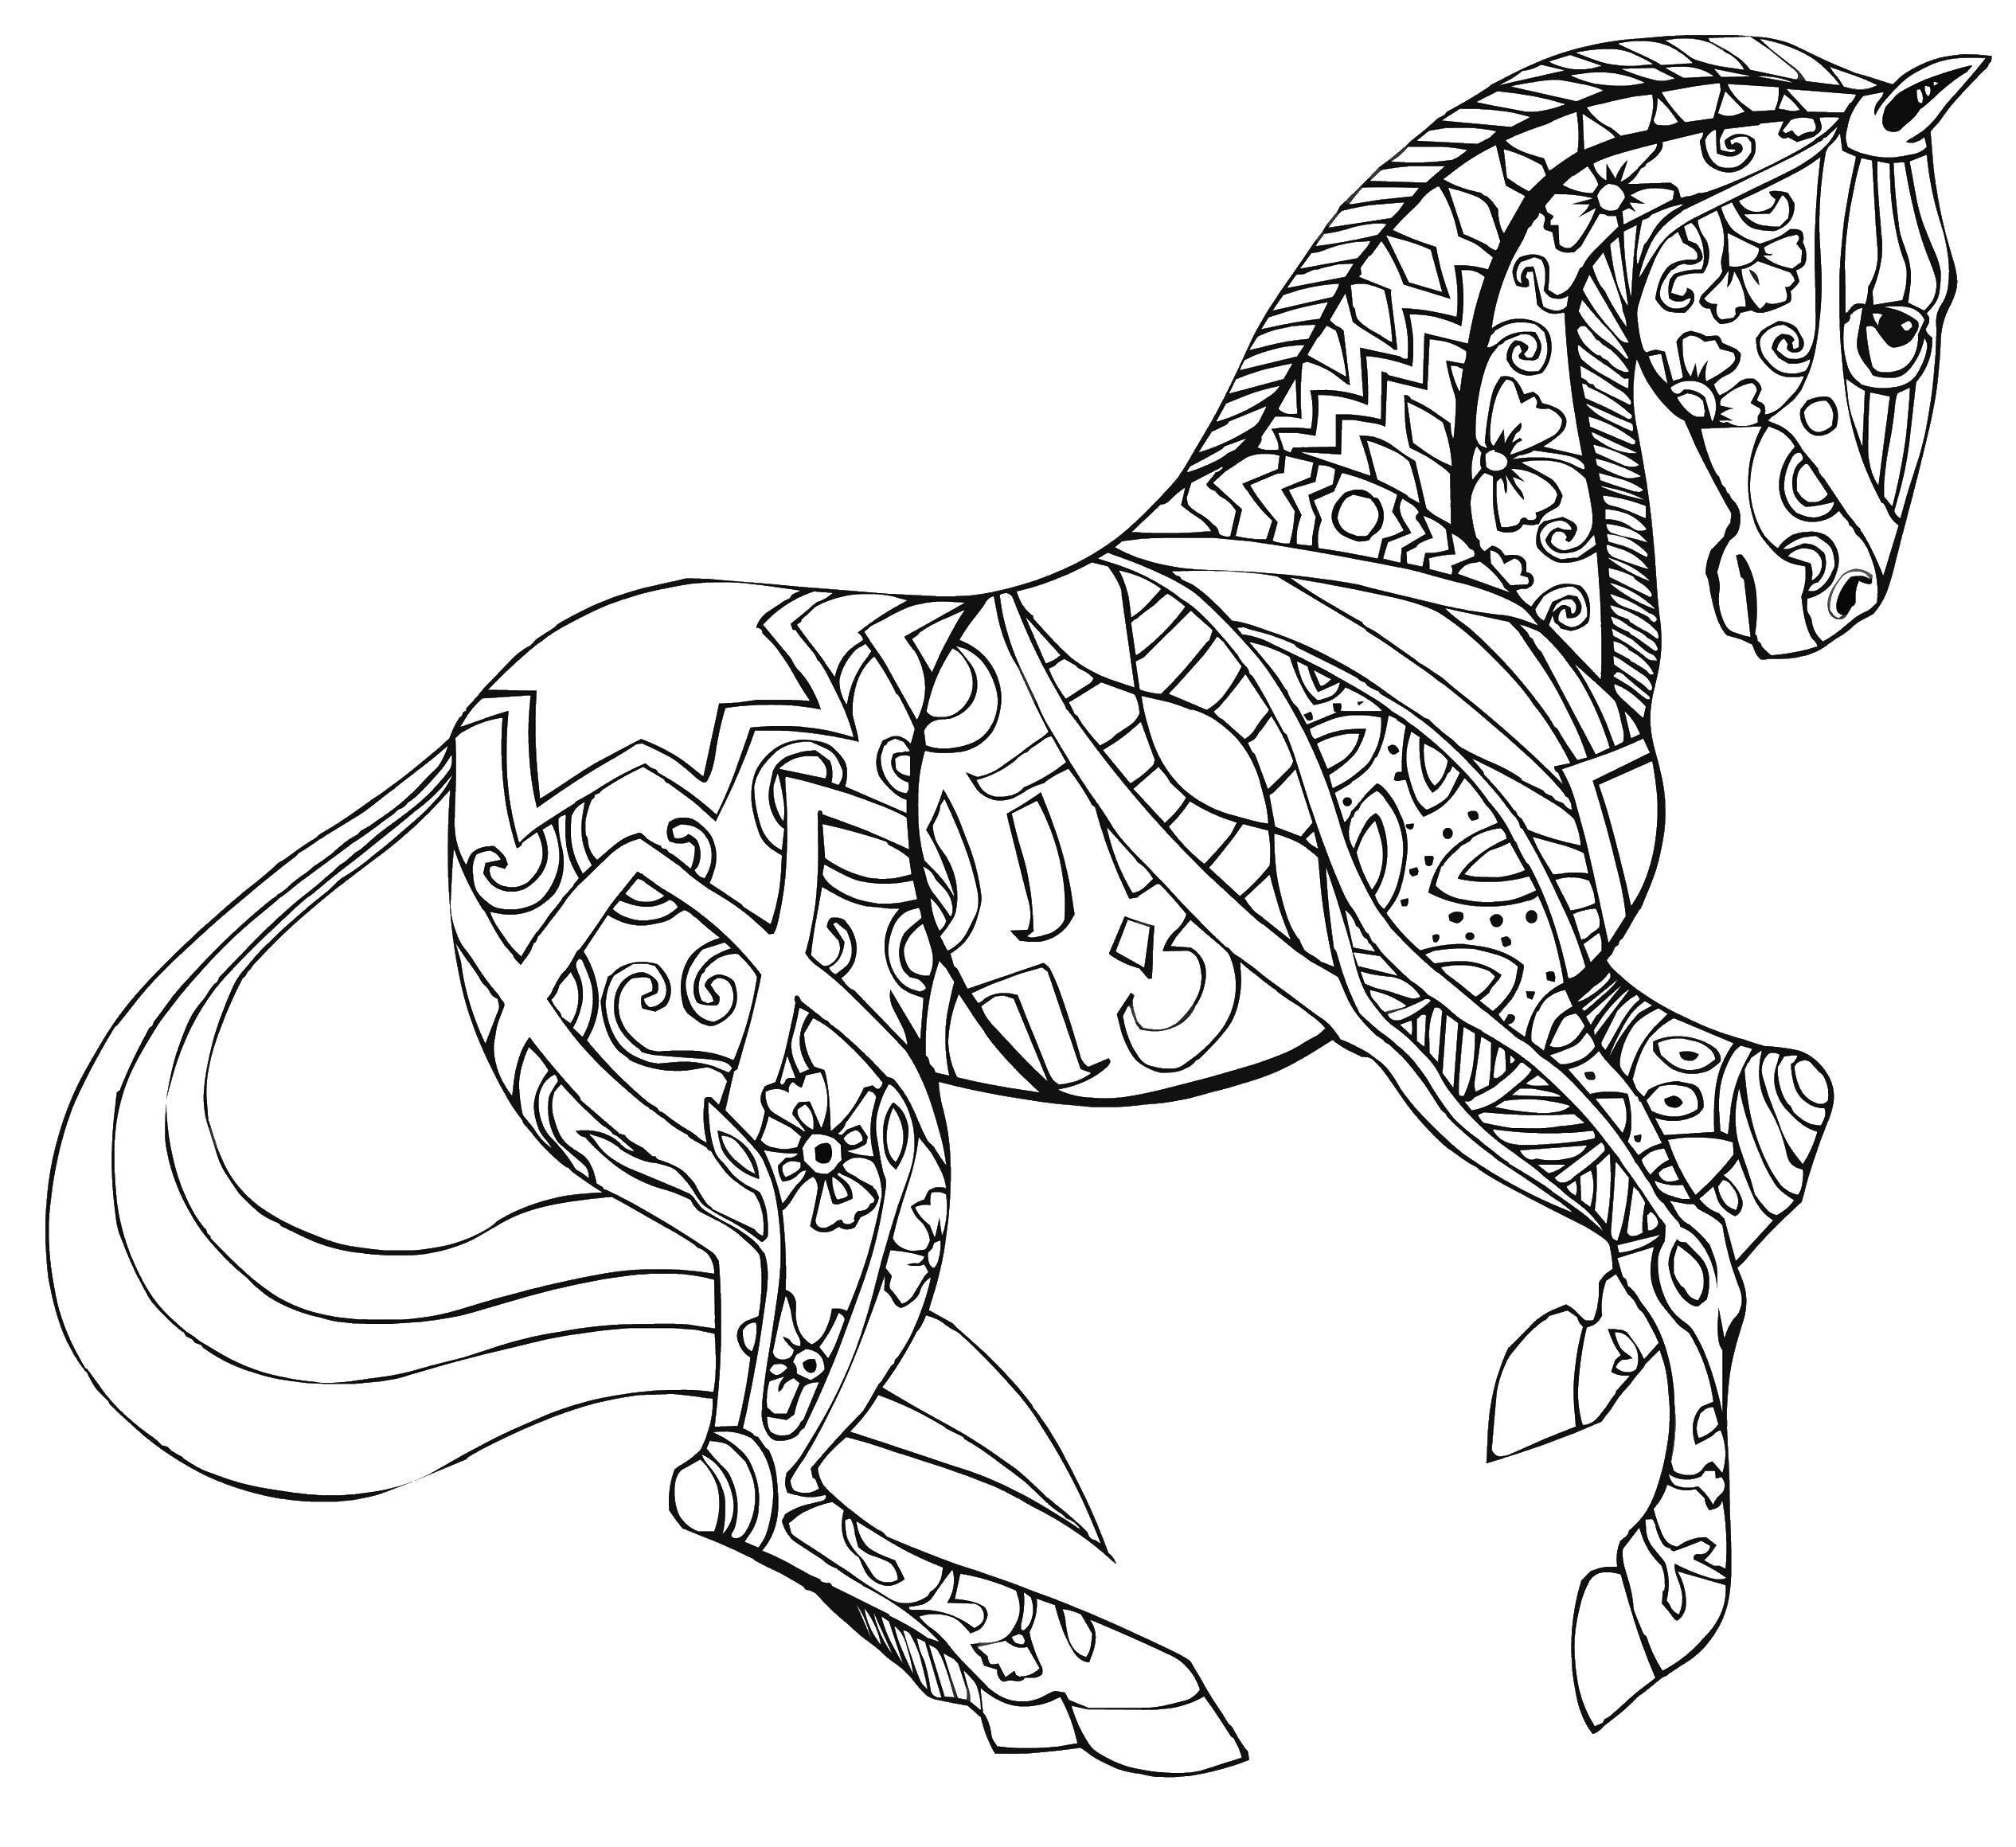 Coloring The horse is covered with patterns. Category Animals. Tags:  Animals, horse.